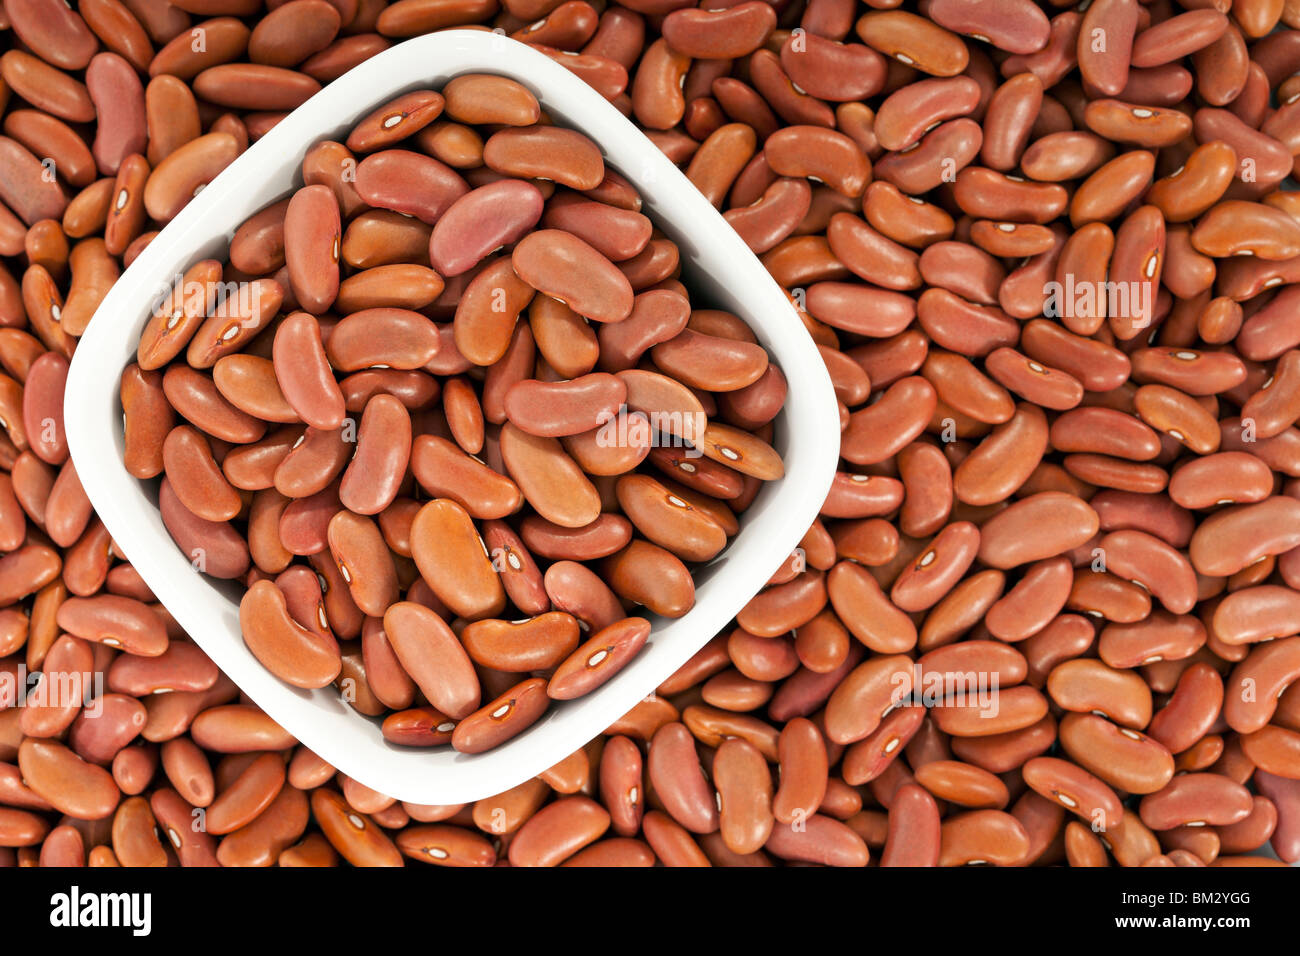 Kidney beans or red beans background with a bowl Stock Photo